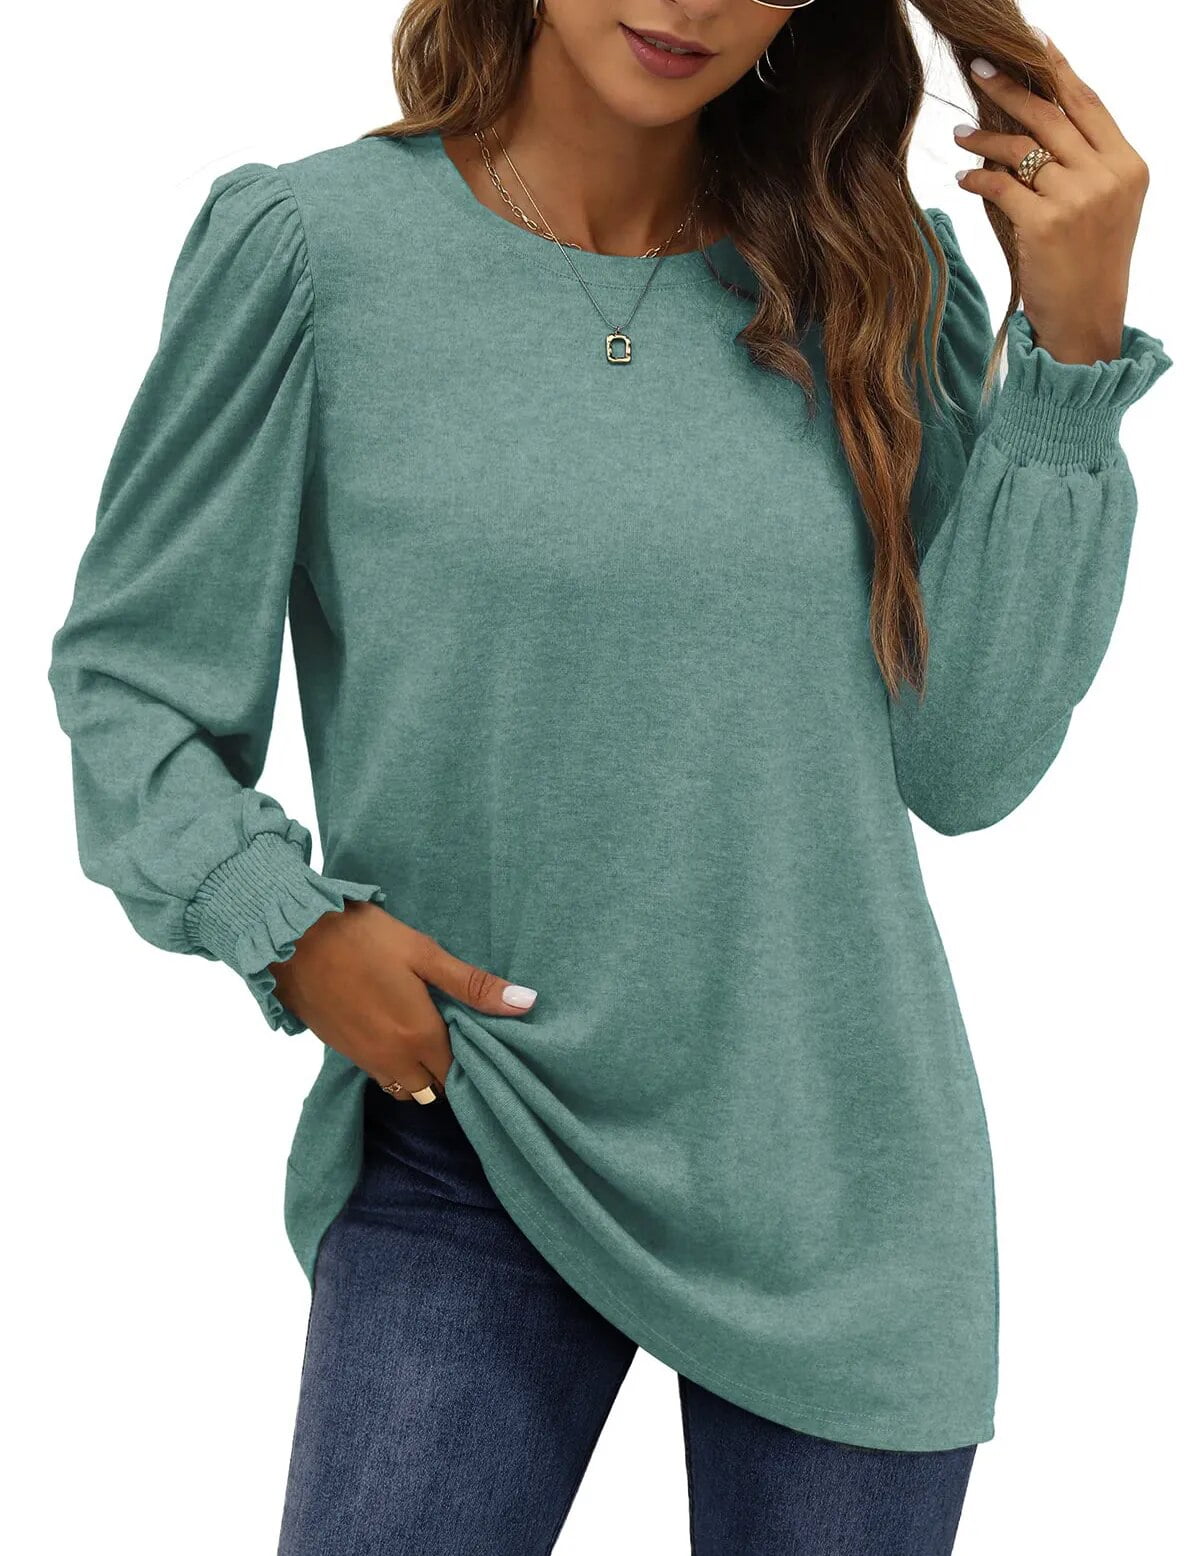 Fantaslook Blouses for Women Dressy Puff Sleeve Tunic Tops Casual Fall  Shirts 